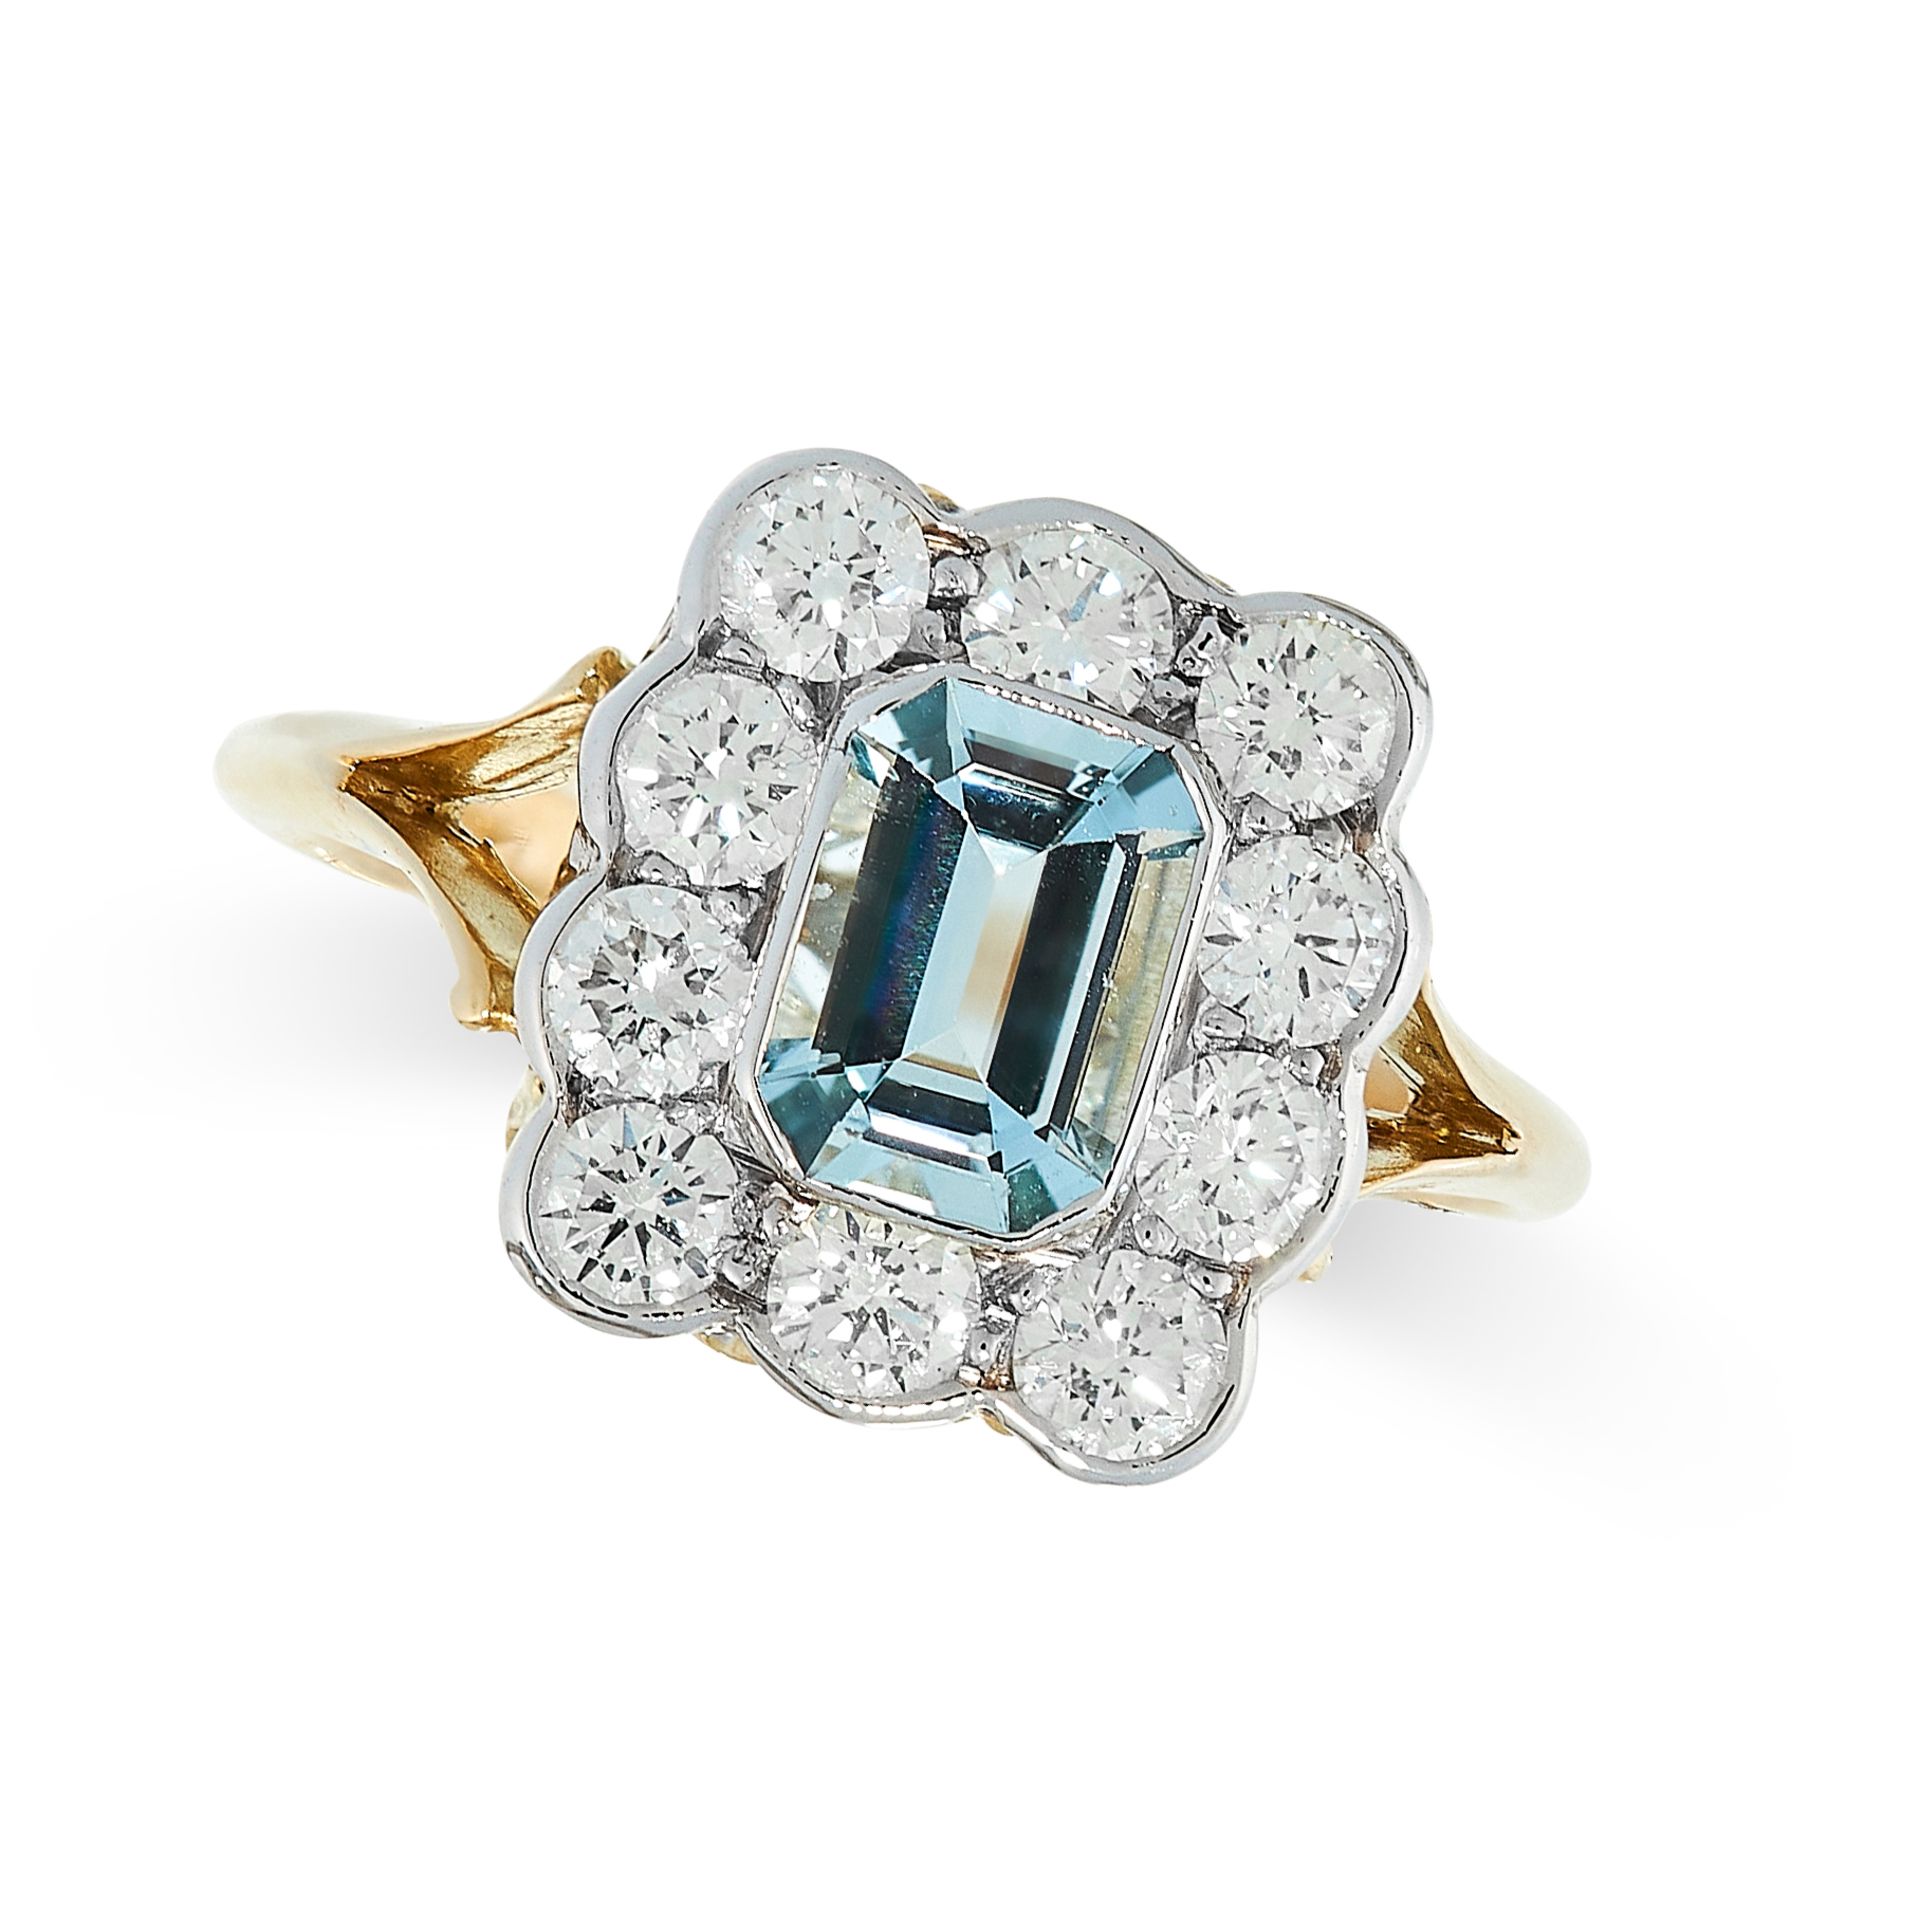 AQUAMARINE AND DIAMOND RING in cluster design, set with an emerald cut aquamarine in a border of